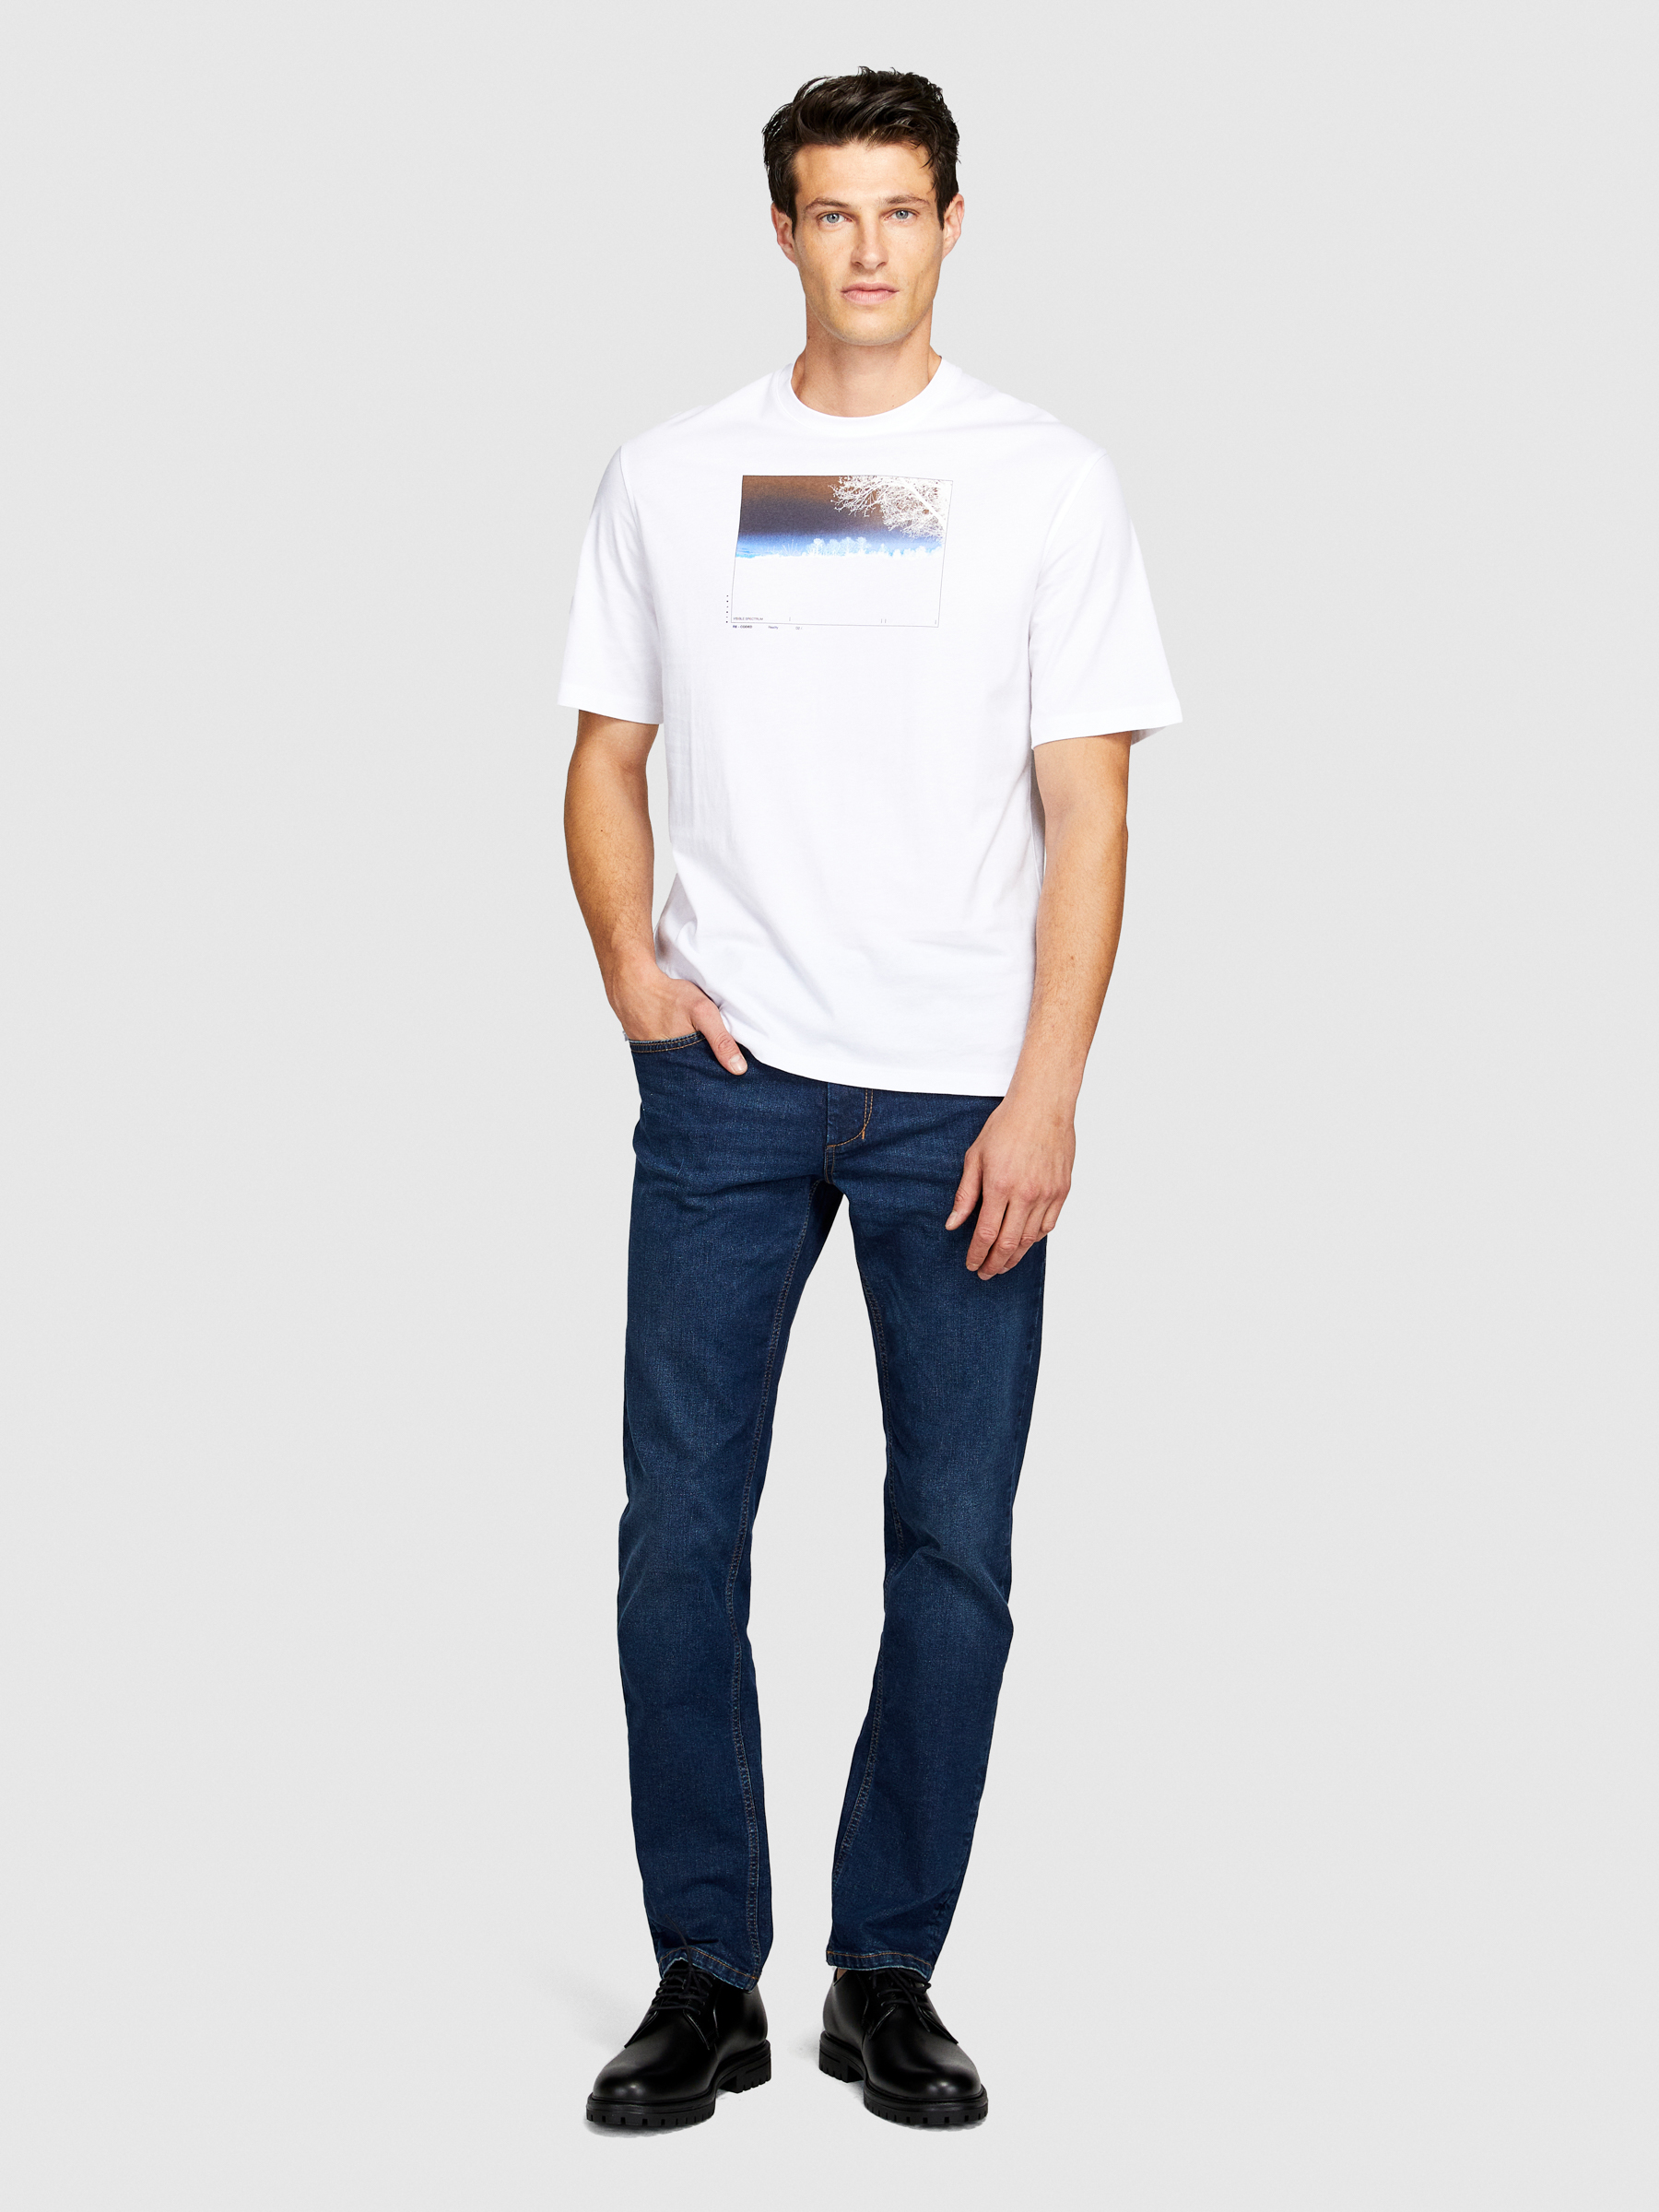 Sisley - T-shirt With Photographic Print, Man, White, Size: EL